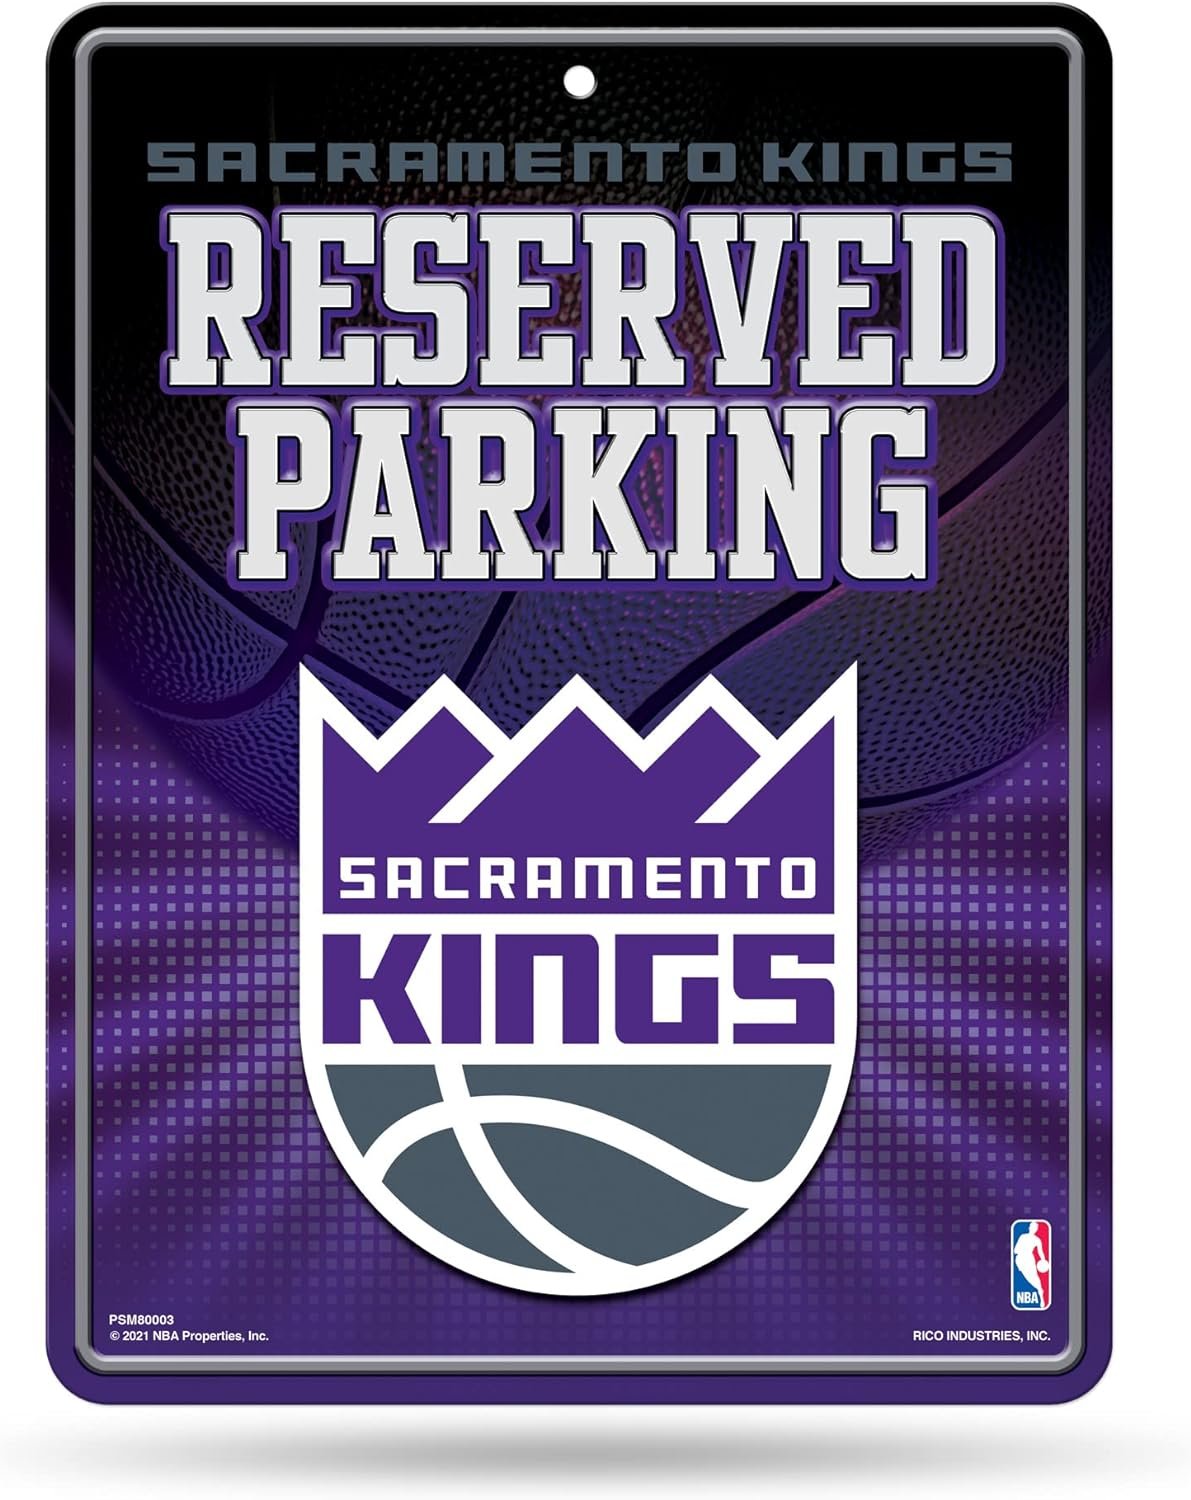 Sacramento Kings Metal Wall Parking Sign, 8.5x11 Inch, PV, Great for Man Cave, Bed Room, Office, Home Decor